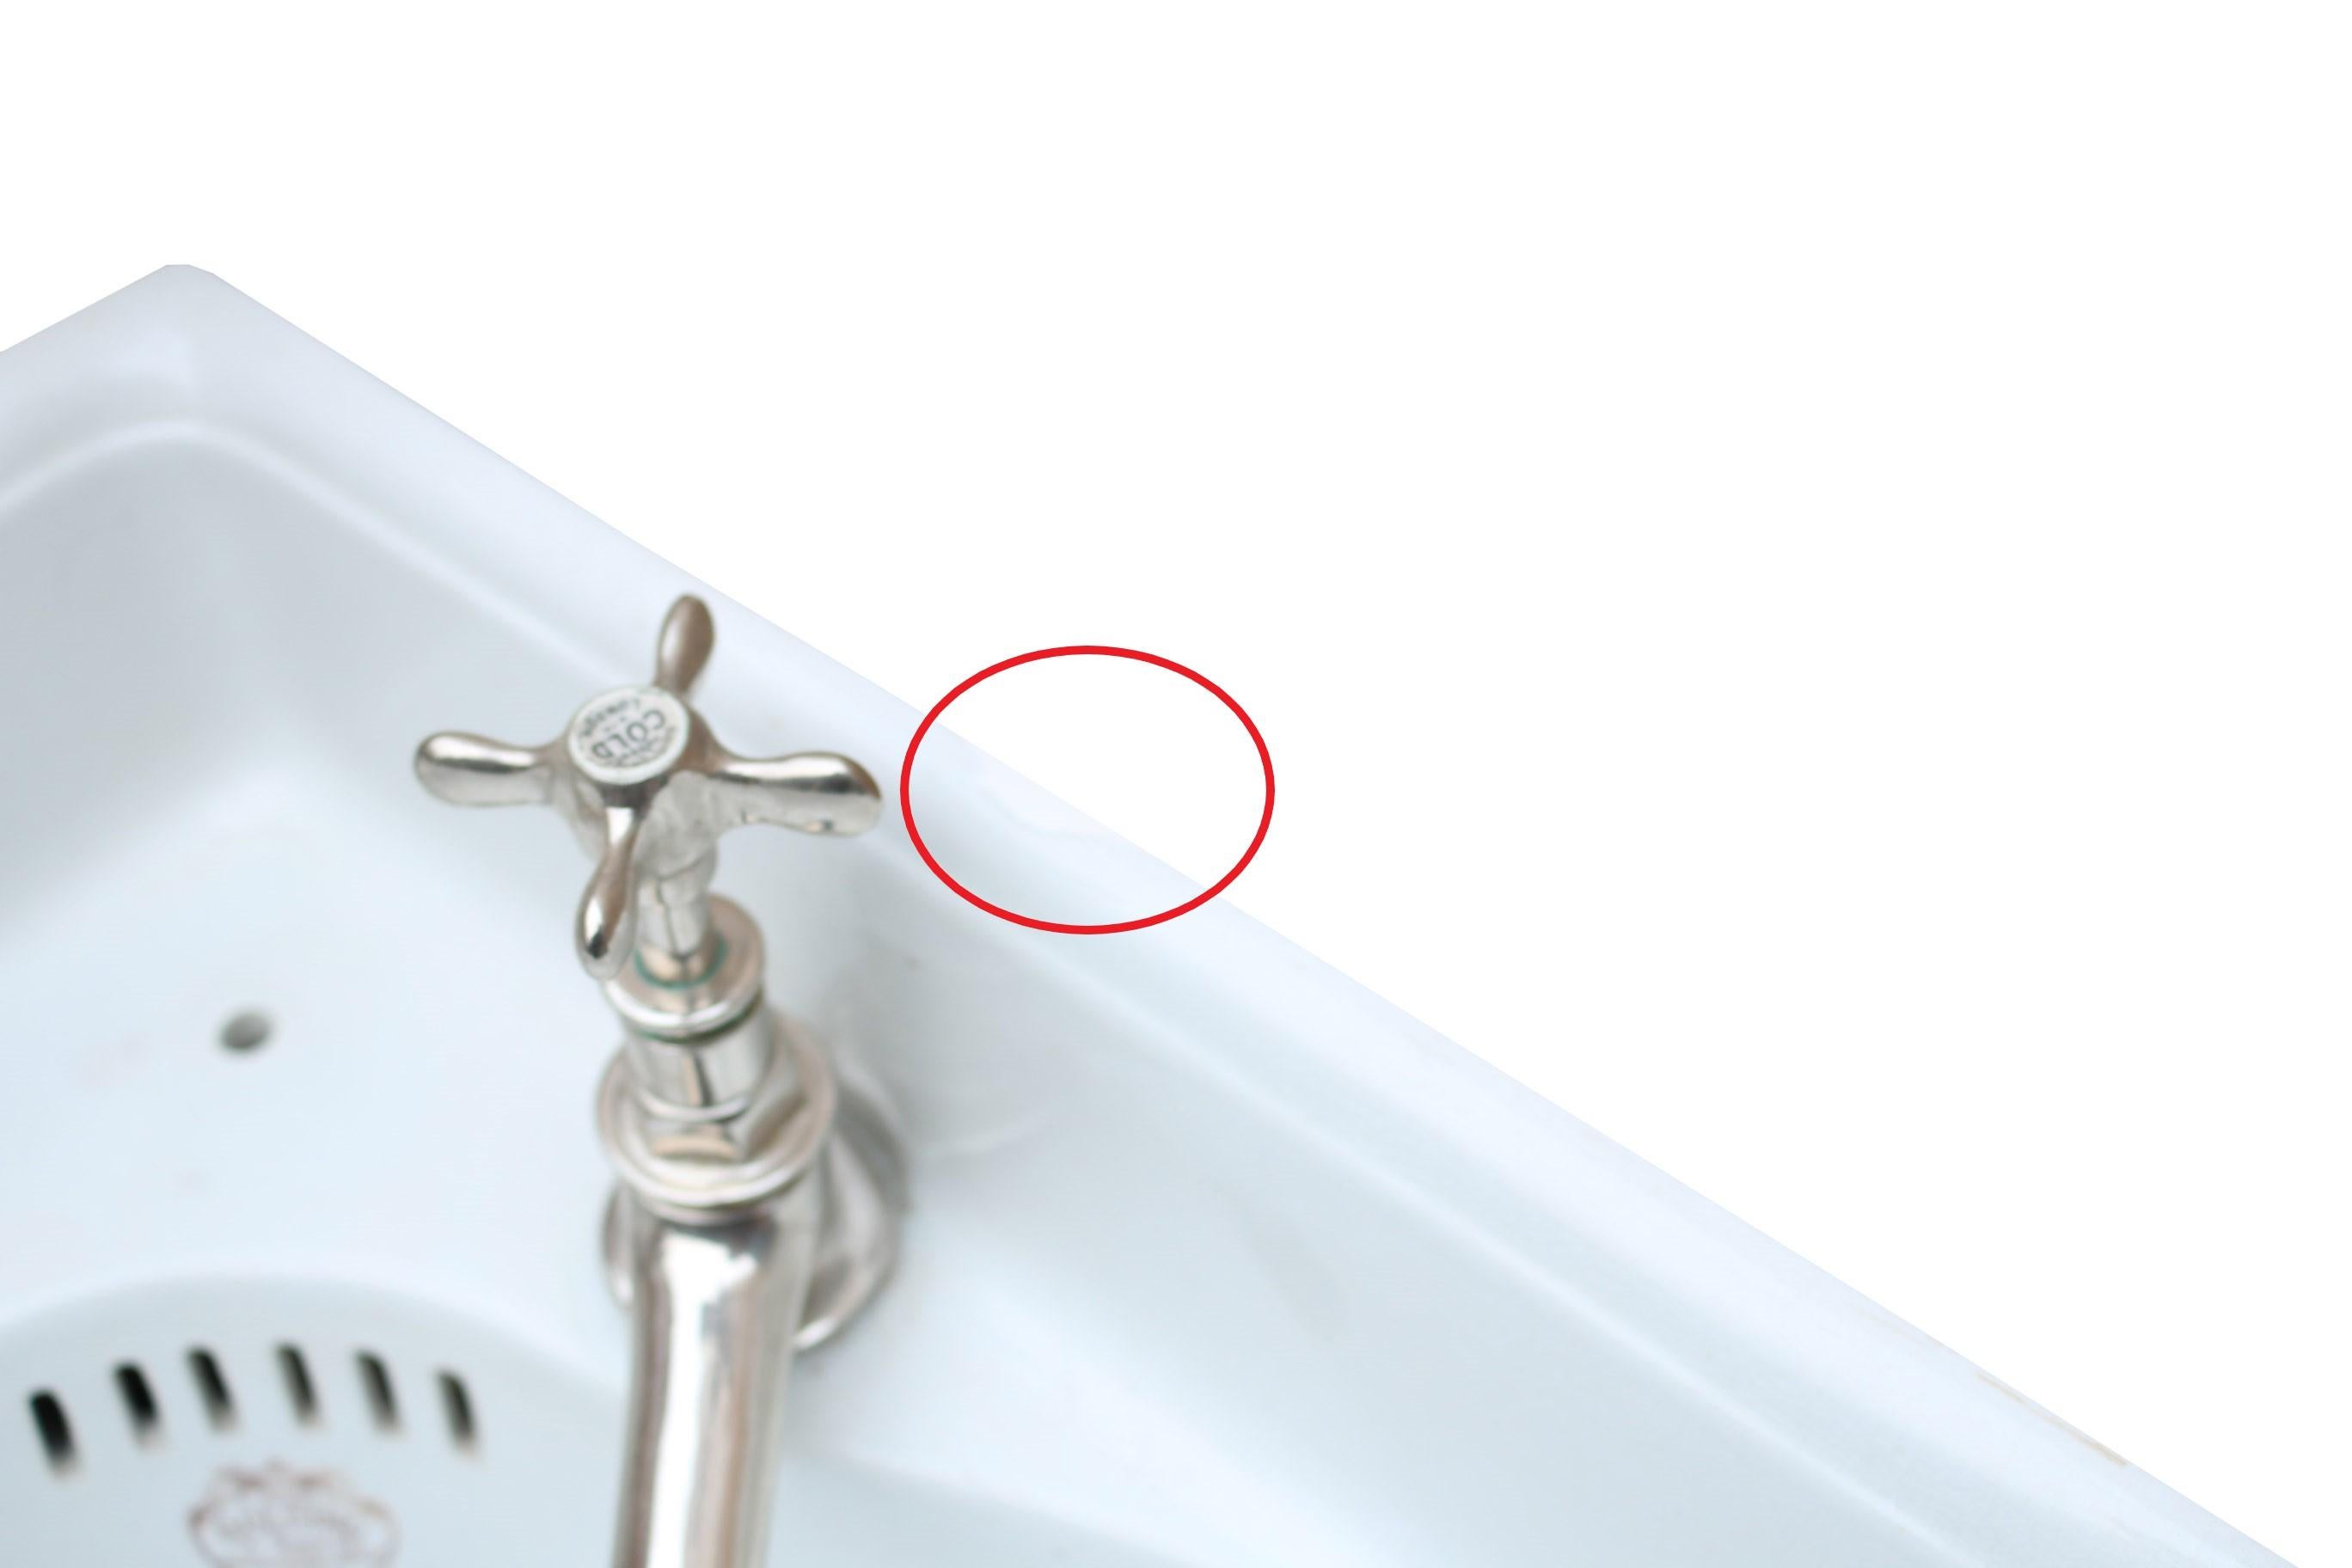 The basin has no cracks, there is moderate crazing throughout with a small chip behind the right tap (as seen in photo) which will be mostly hidden by mastic once installed. Otherwise in excellent condition for its age.

The taps are not included